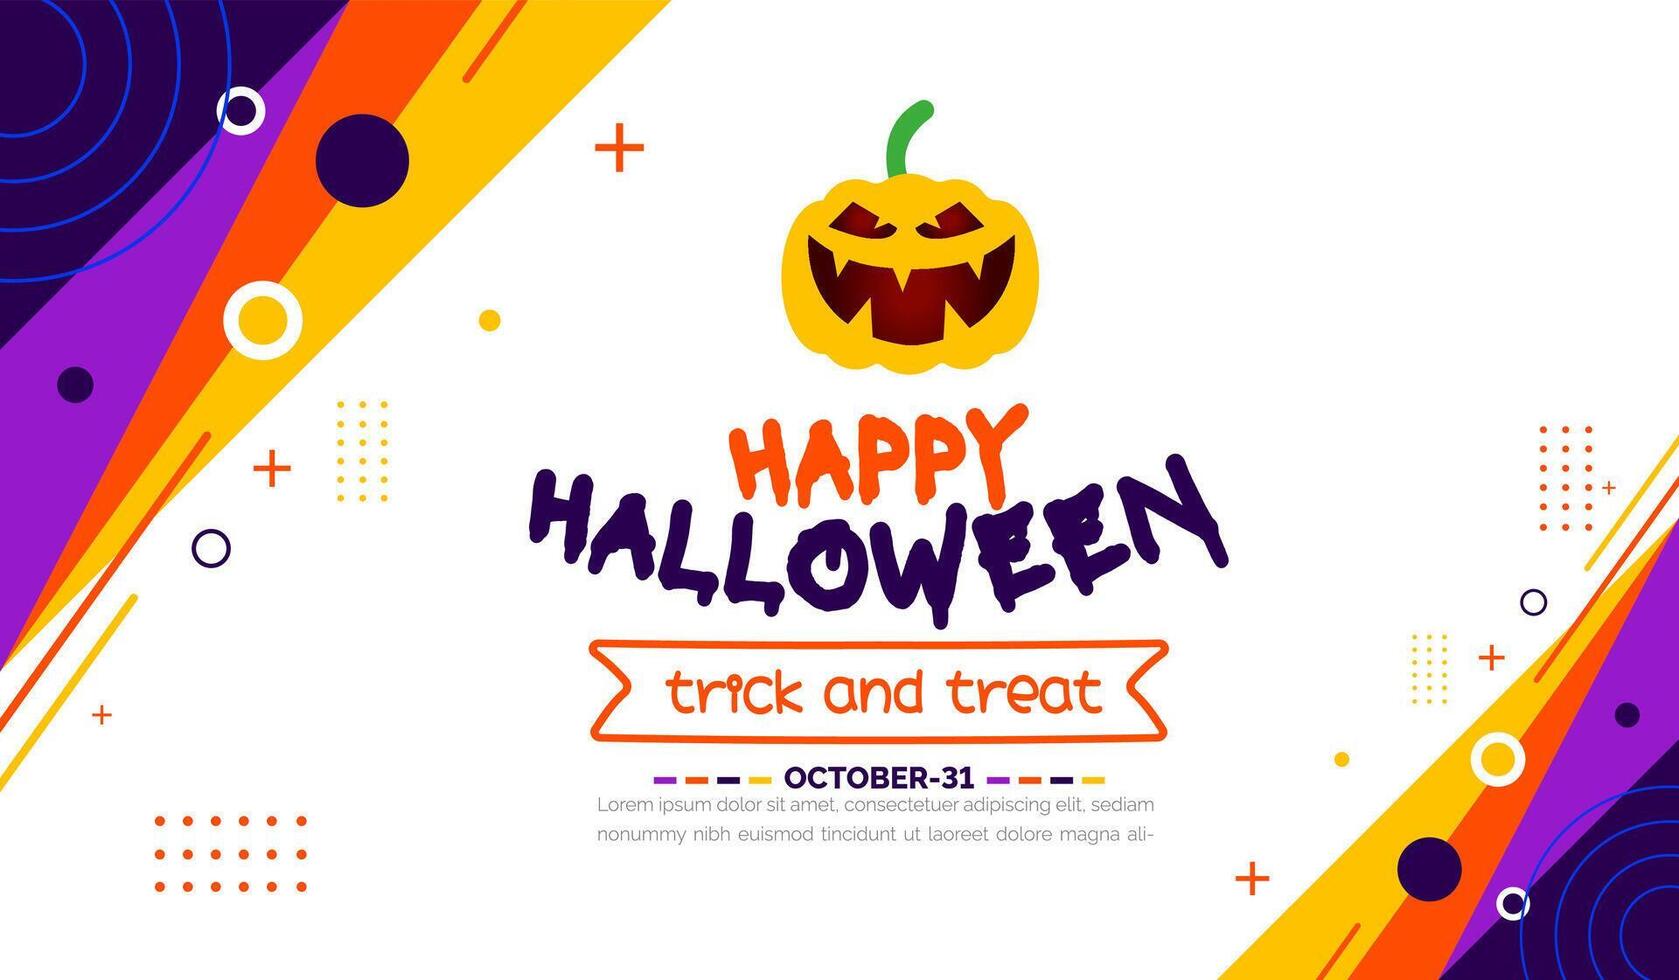 31 October happy Halloween background design with pumpkins. use to background, banner, placard, party invitation card, book cover and poster design template with text inscription and standard color. vector